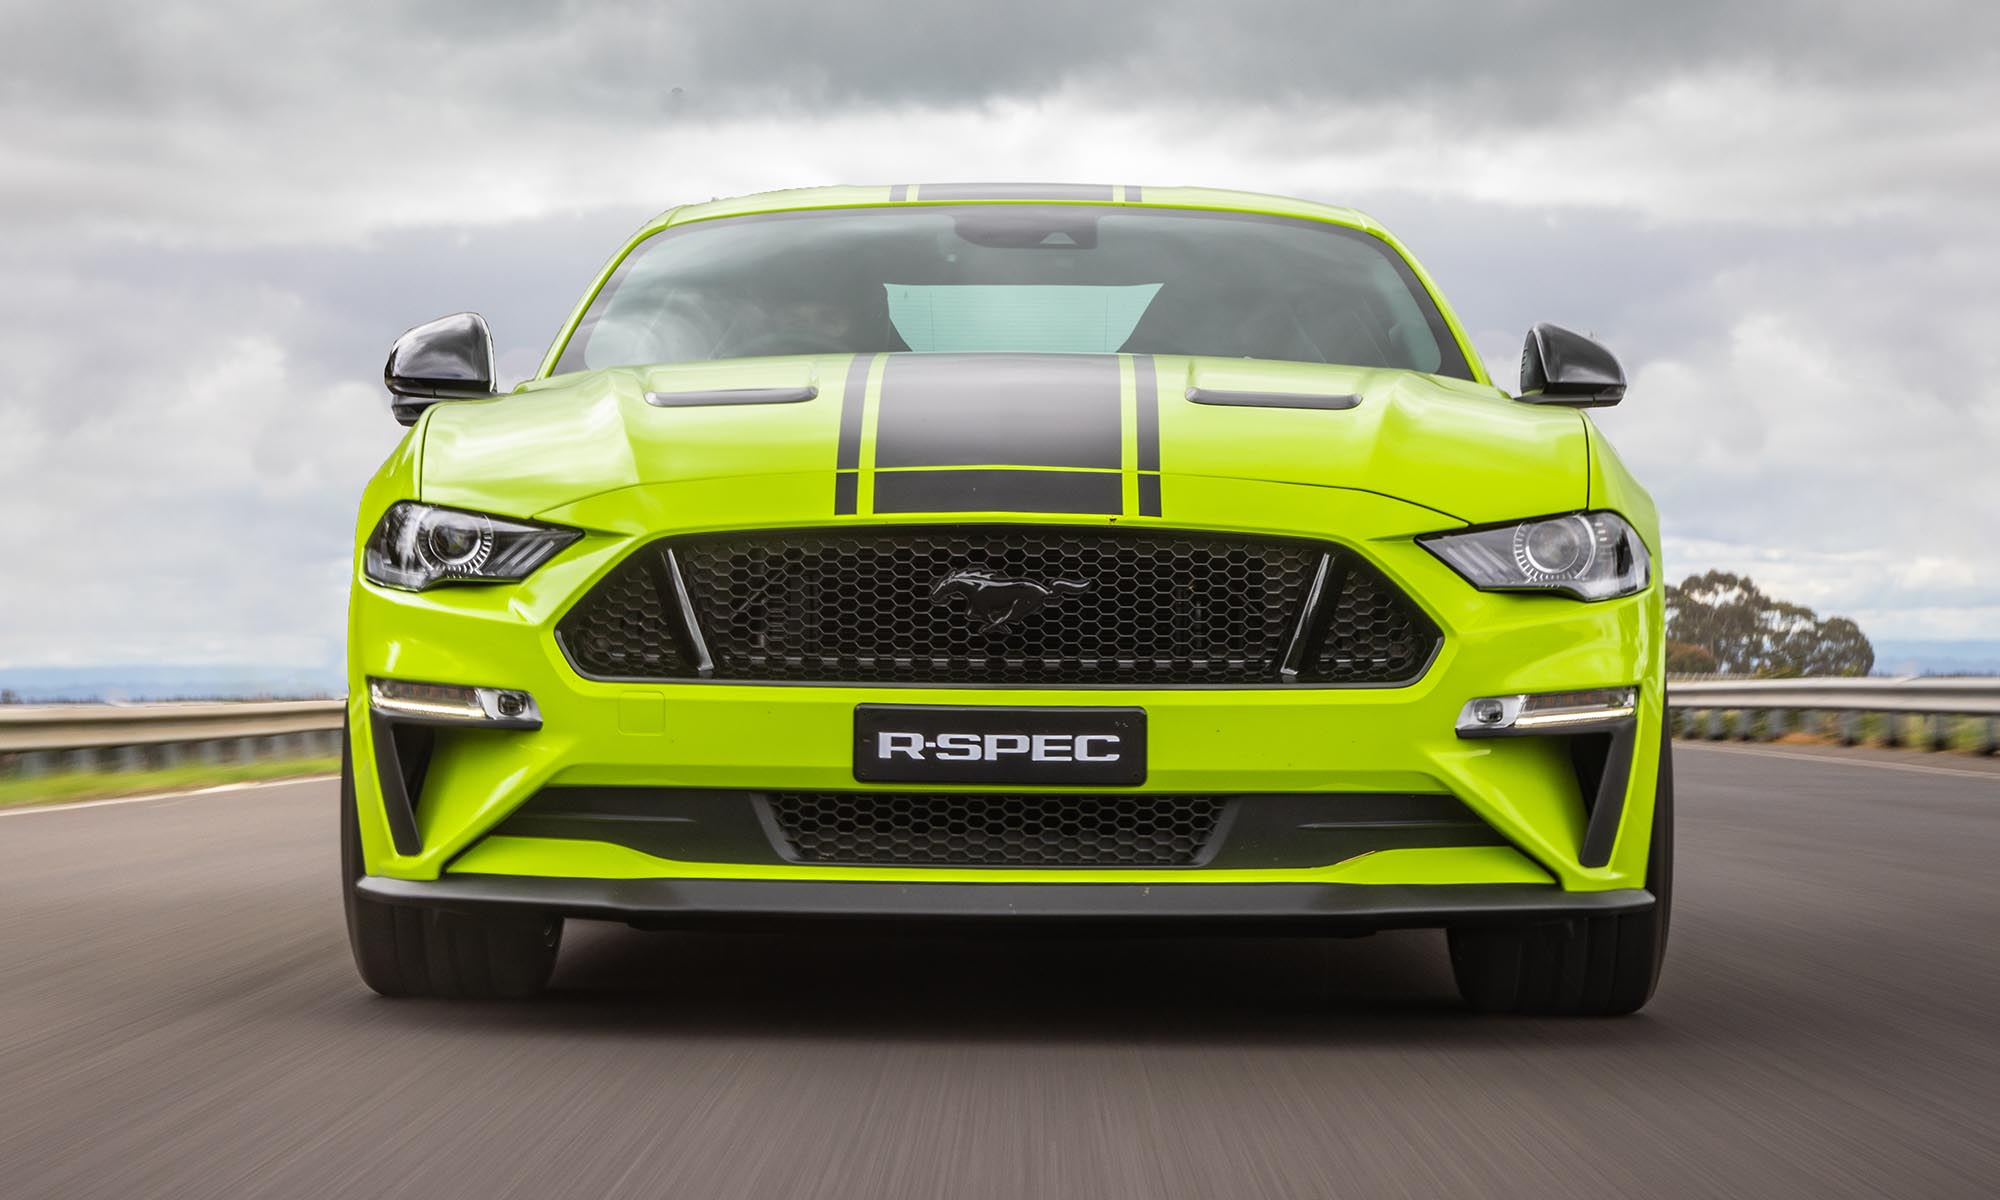 Ford Mustang R-Spec, six-speed manual gearbox, Herrod Performance, sport, race, normal, Blue Oval's Australian division, Ford, Ford Mustang, Mustang, car, cars, supercars, instacars, carpic, automobile, lovecars, horsepower, exoticcars, supercharged, boosted, carlover, hypercar, dreamcars, luxury, modified, tuning, turbo, fastcar, racecar, motorsport, engine, carshow, carspotting, automotive, autos, carswithoutlimits, carlifestyle, tuning, tuningcar, carsfromgermany, drive, vehicles, speed, v8, youtube, video